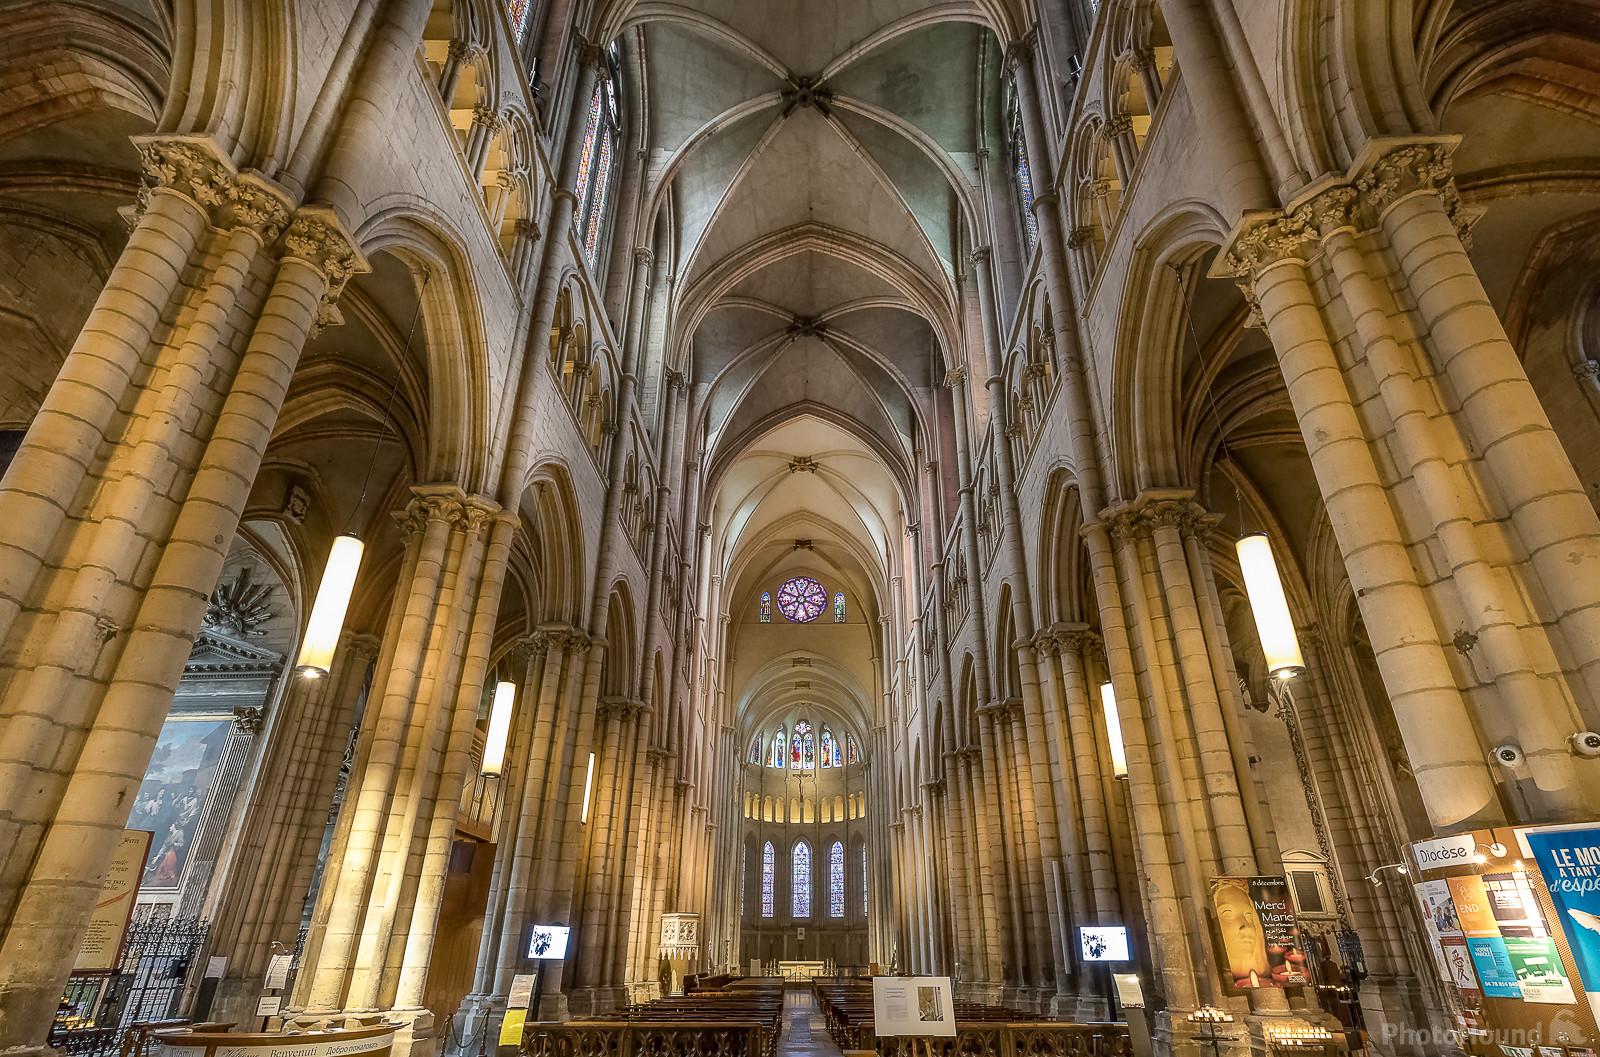 Image of Interior of the cathedral St-Jean by Frédéric Monin